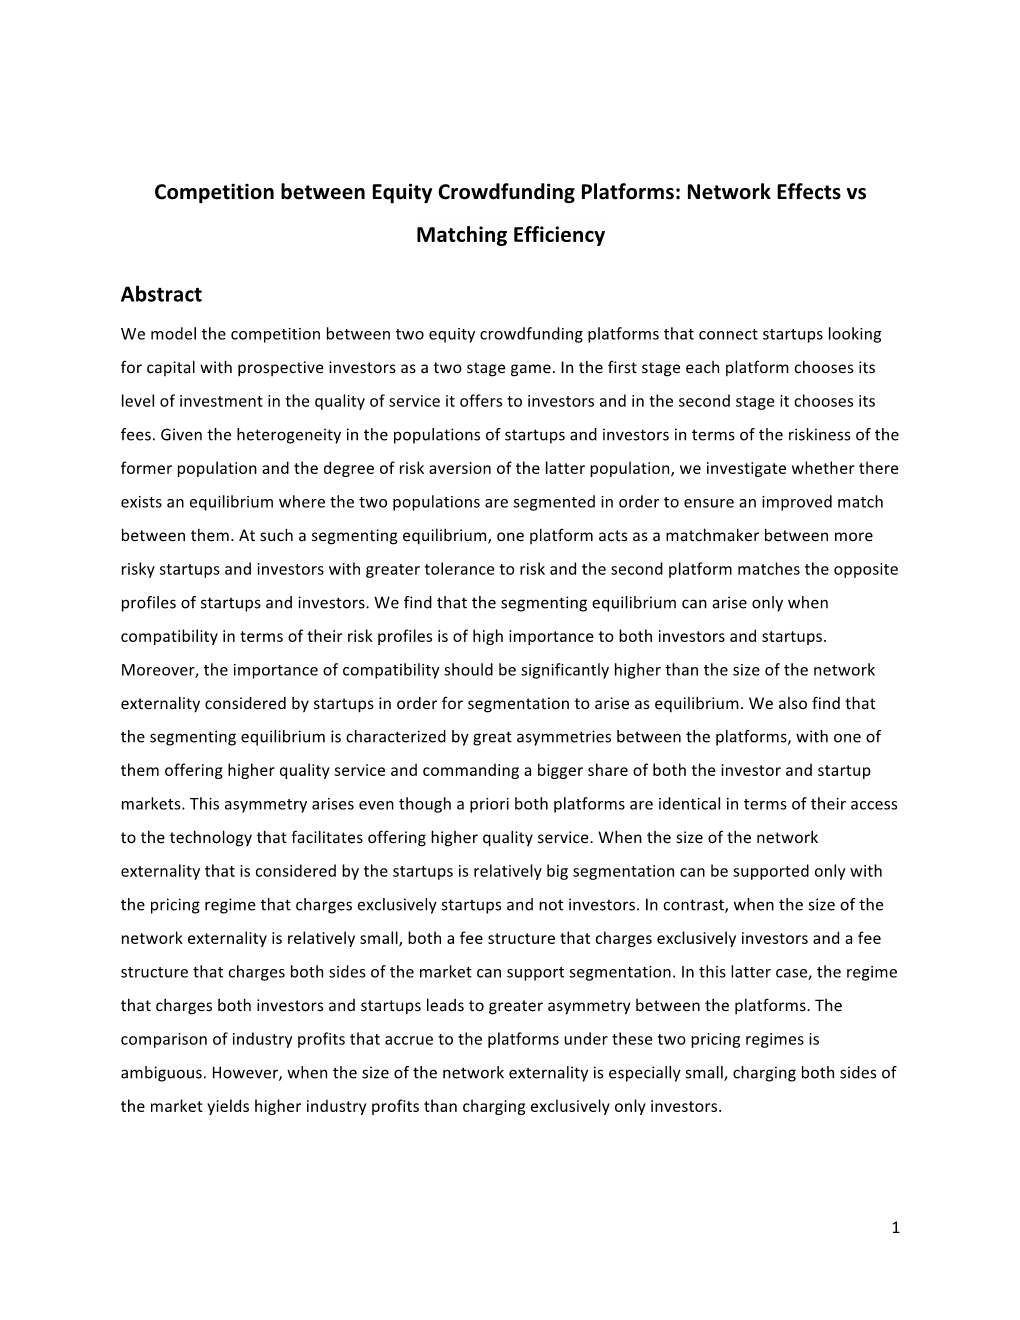 Competition Between Equity Crowdfunding Platforms: Network Effects Vs Matching Efficiency